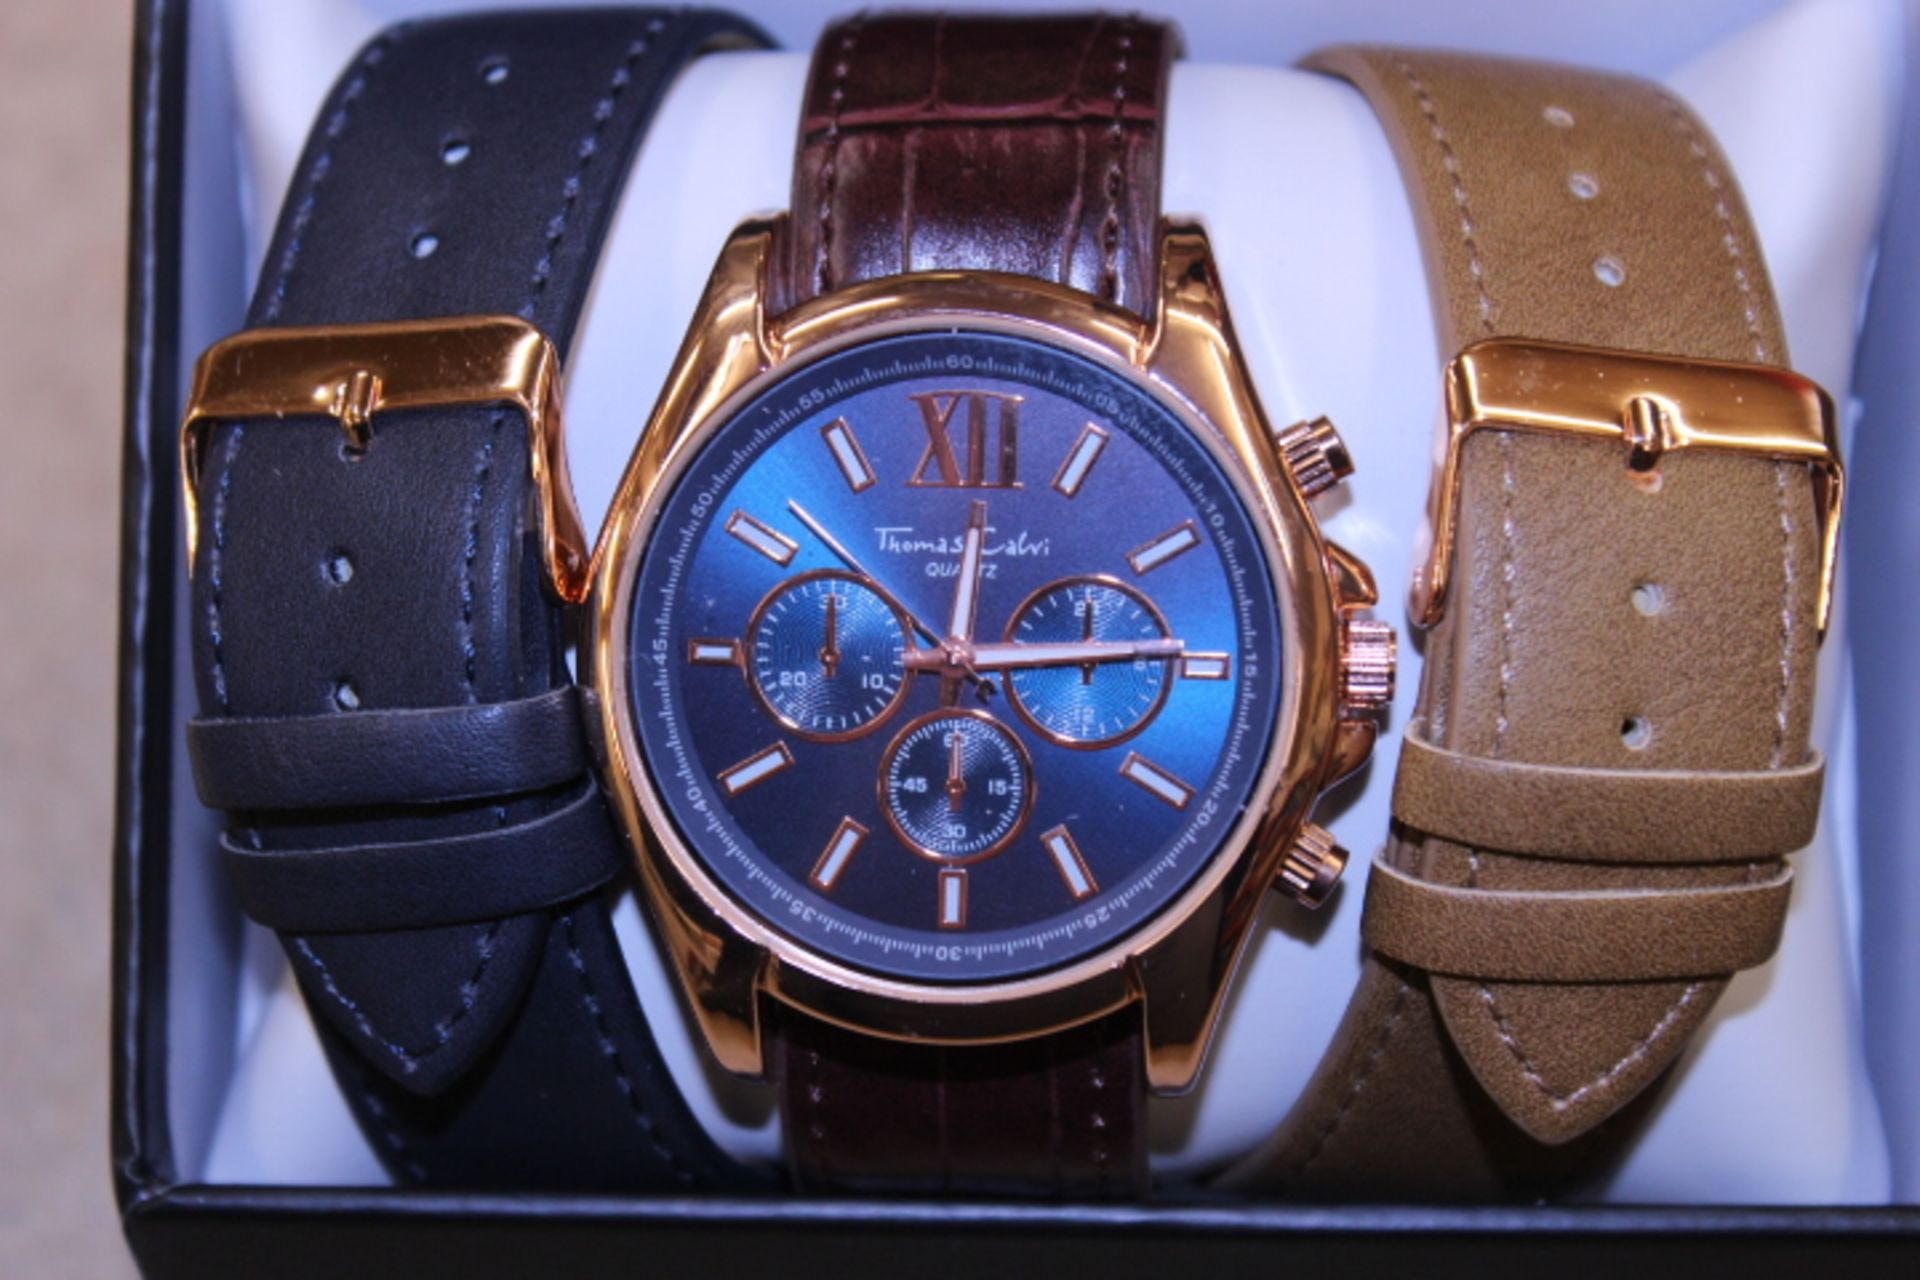 V Brand New Gents Thomas Calvi Watch - Blue Face - Two Additional Straps In Gift Box